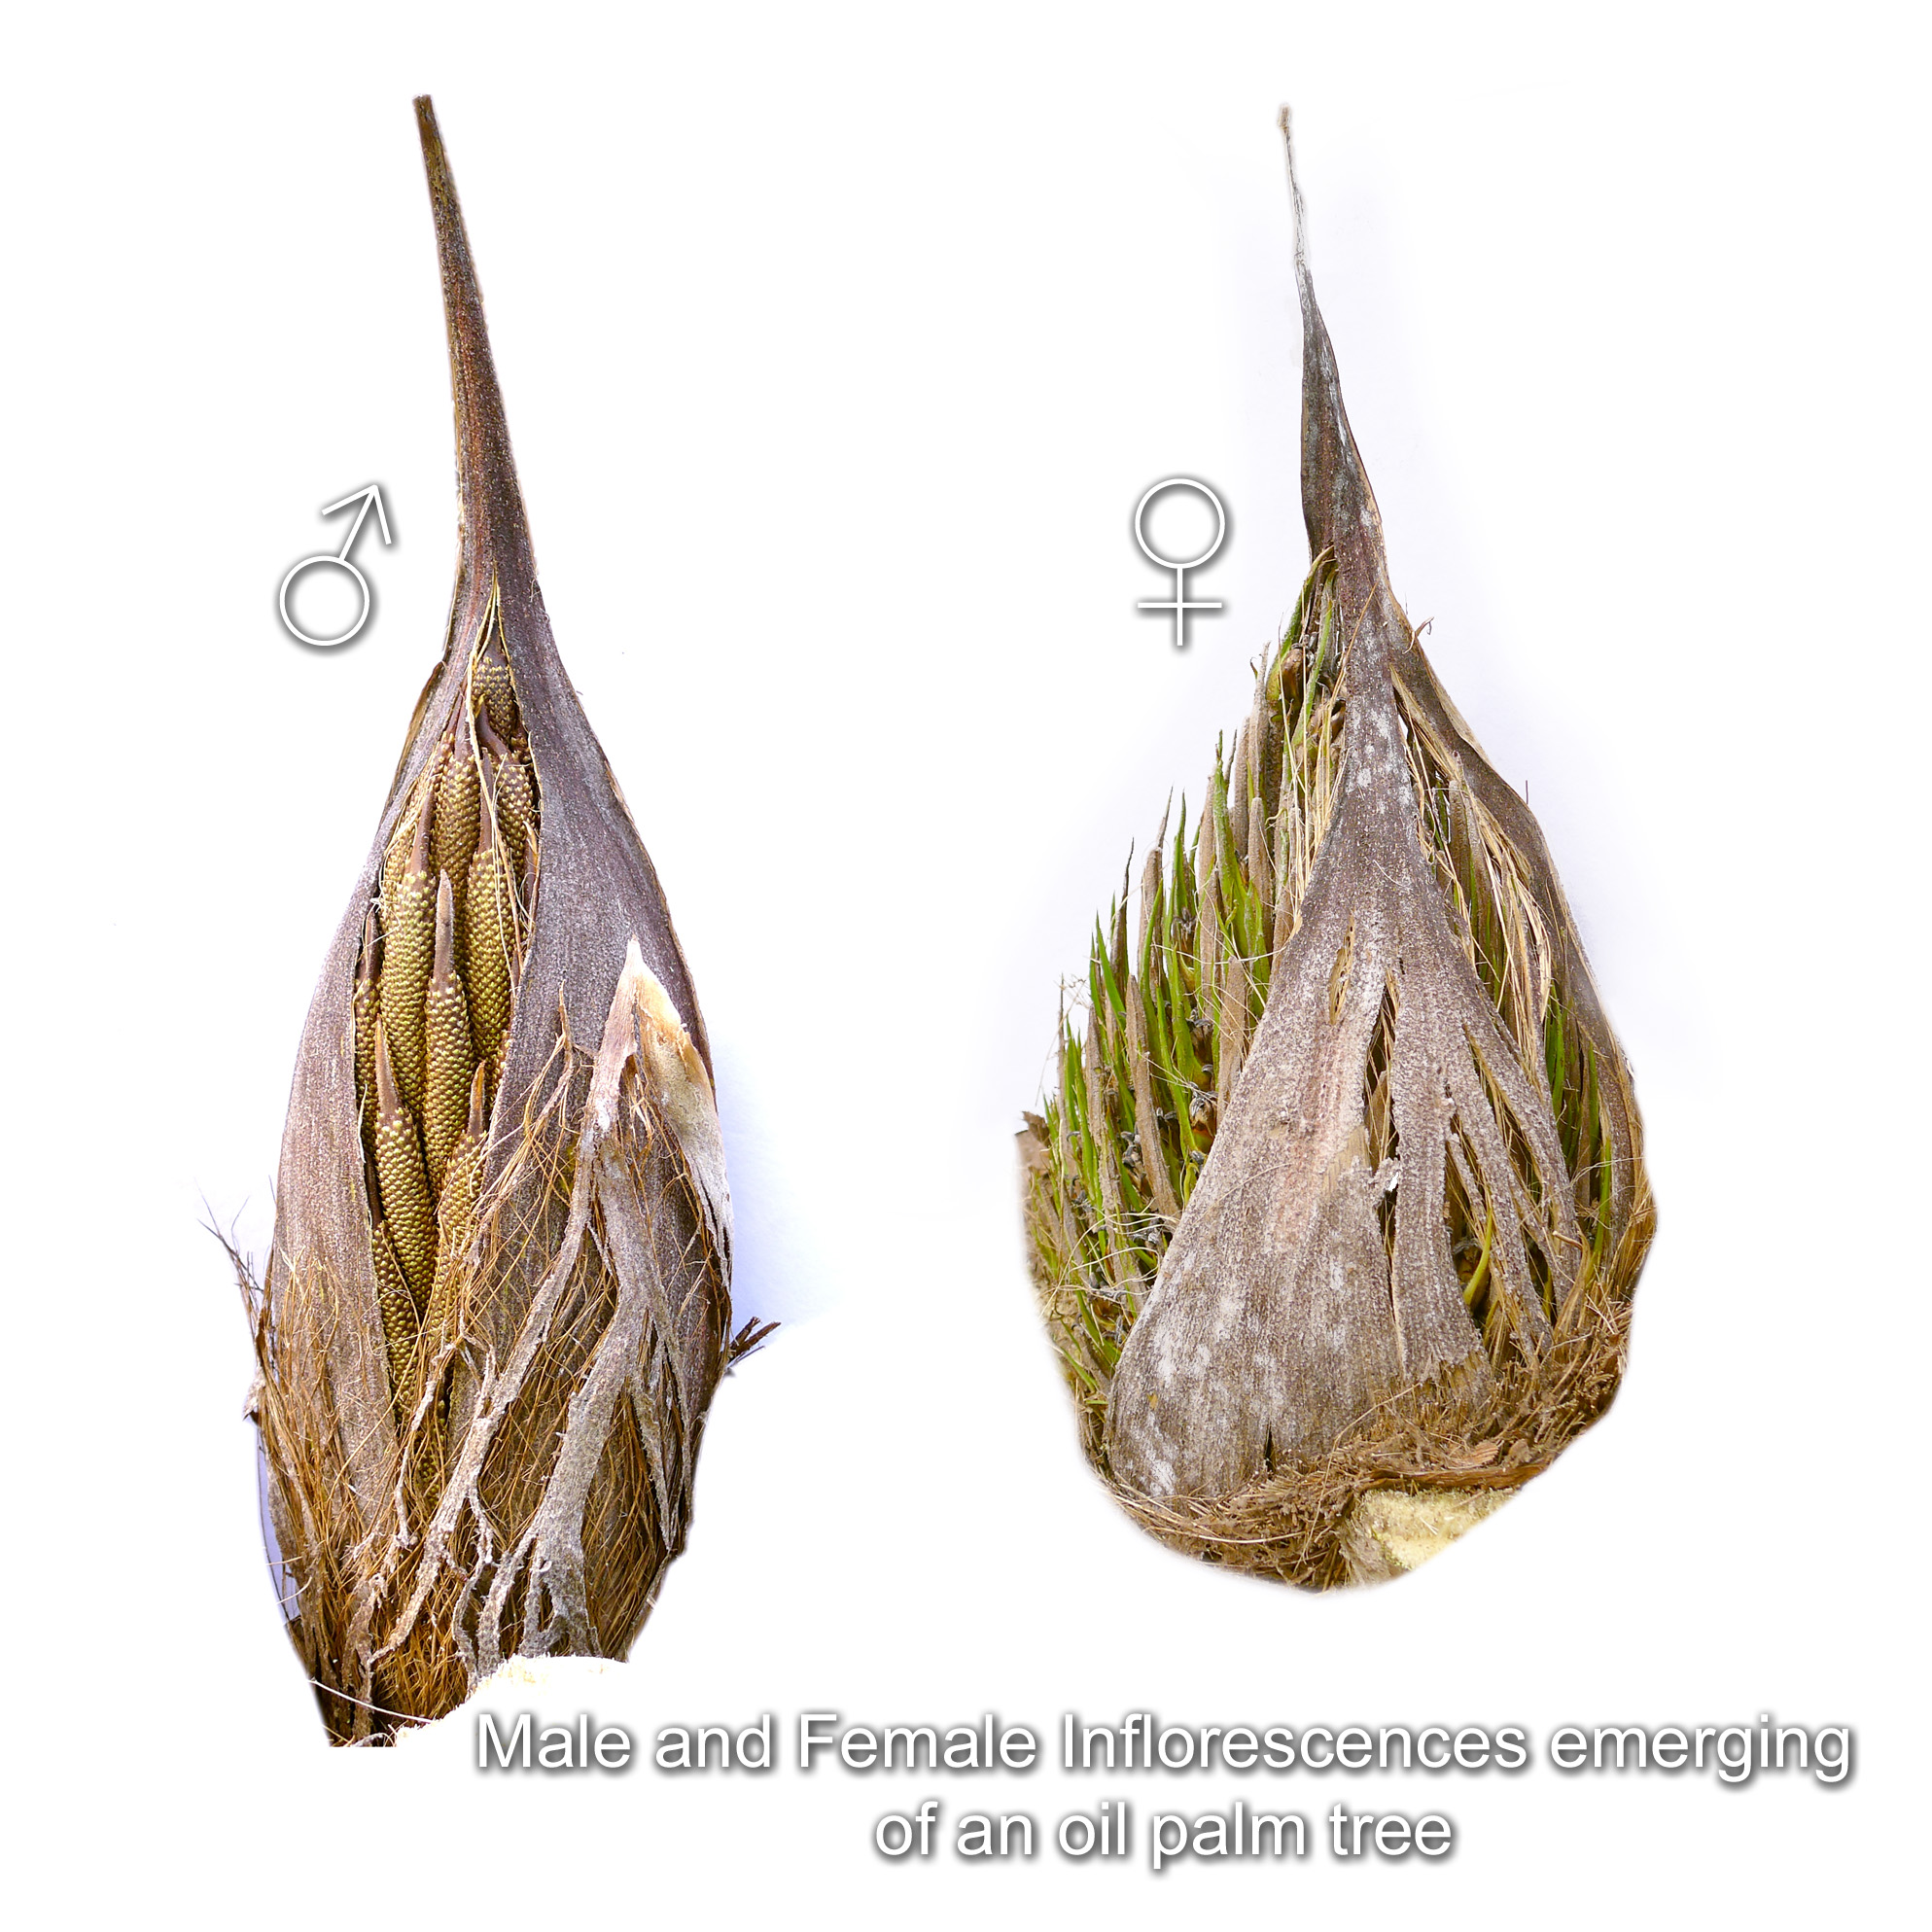 Male and Female Inflorescences emerging of an oil palm tree